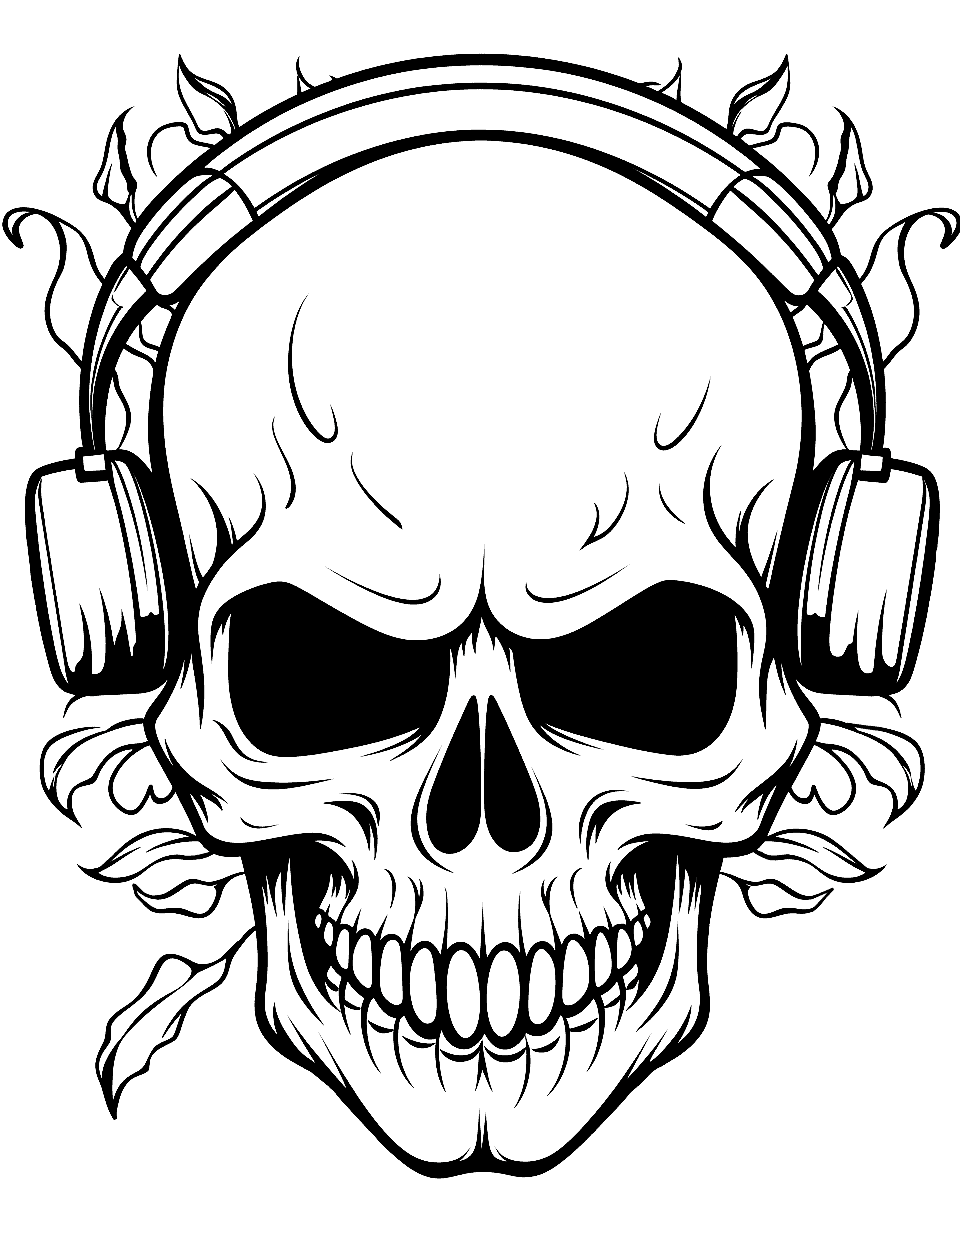 Music Lover Skull Coloring Page - A skull with headphones.